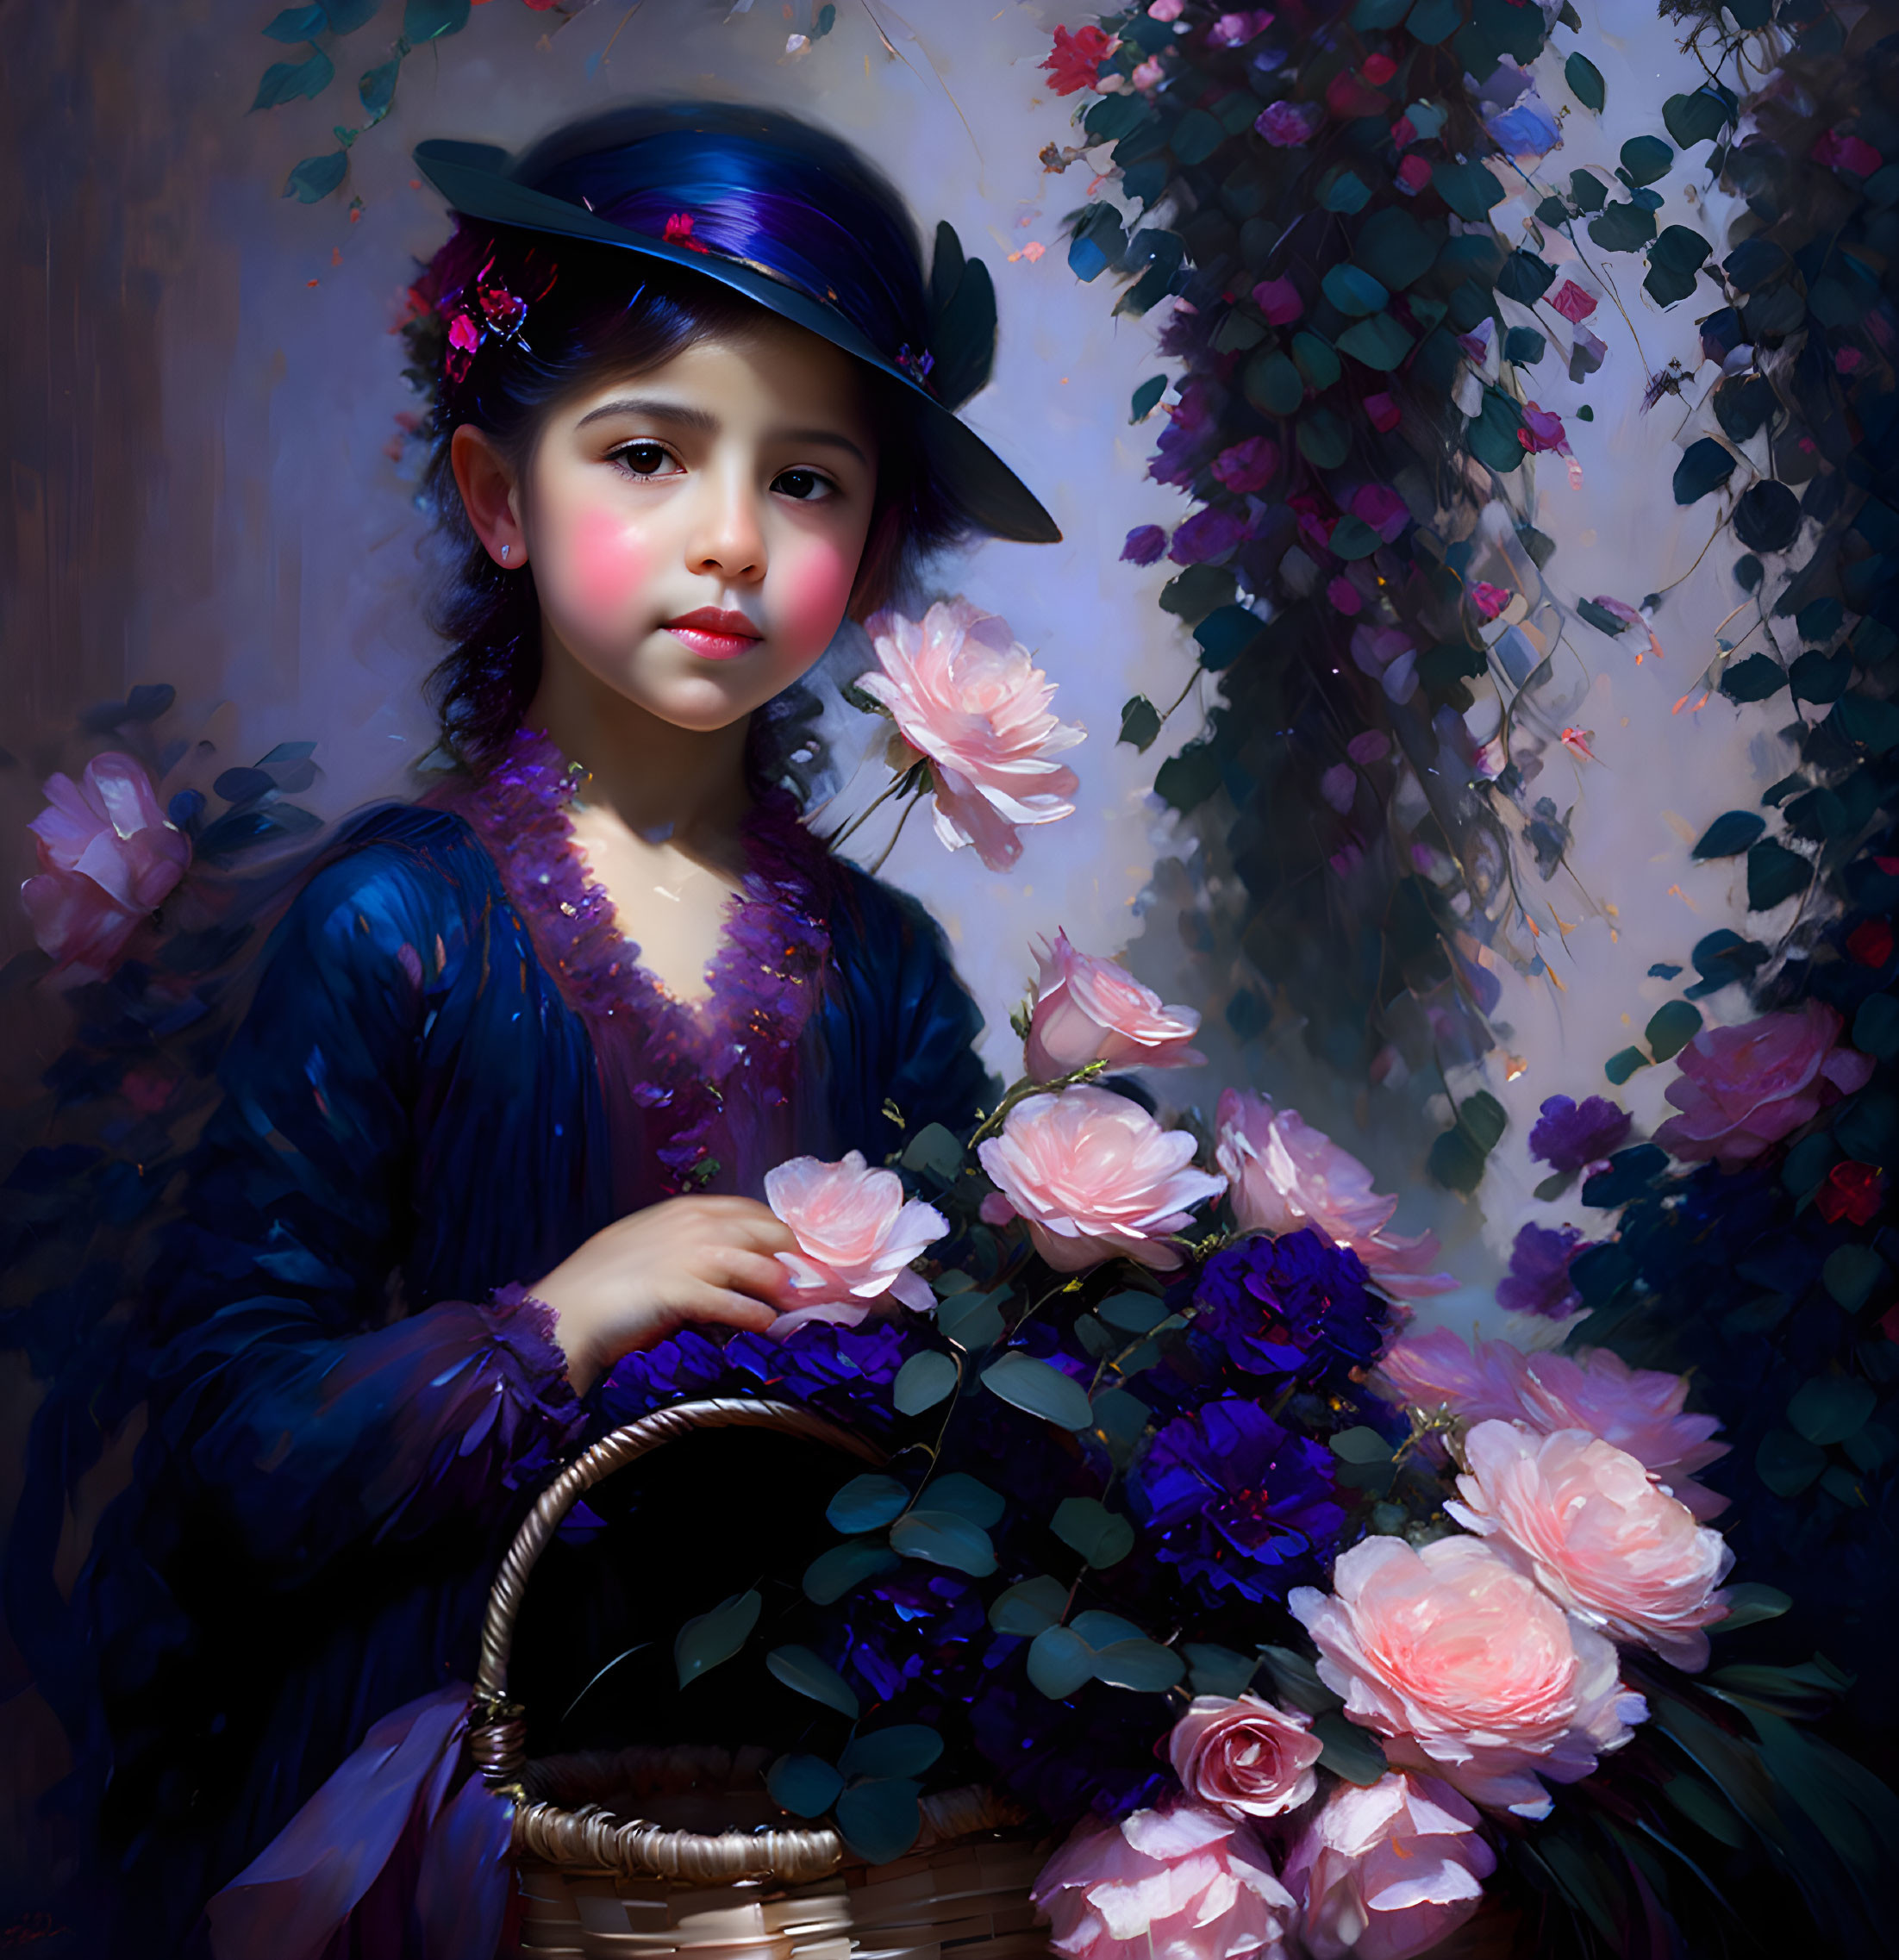 Young girl in navy blue dress and floral hat with pink roses basket, painterly style, dark floral